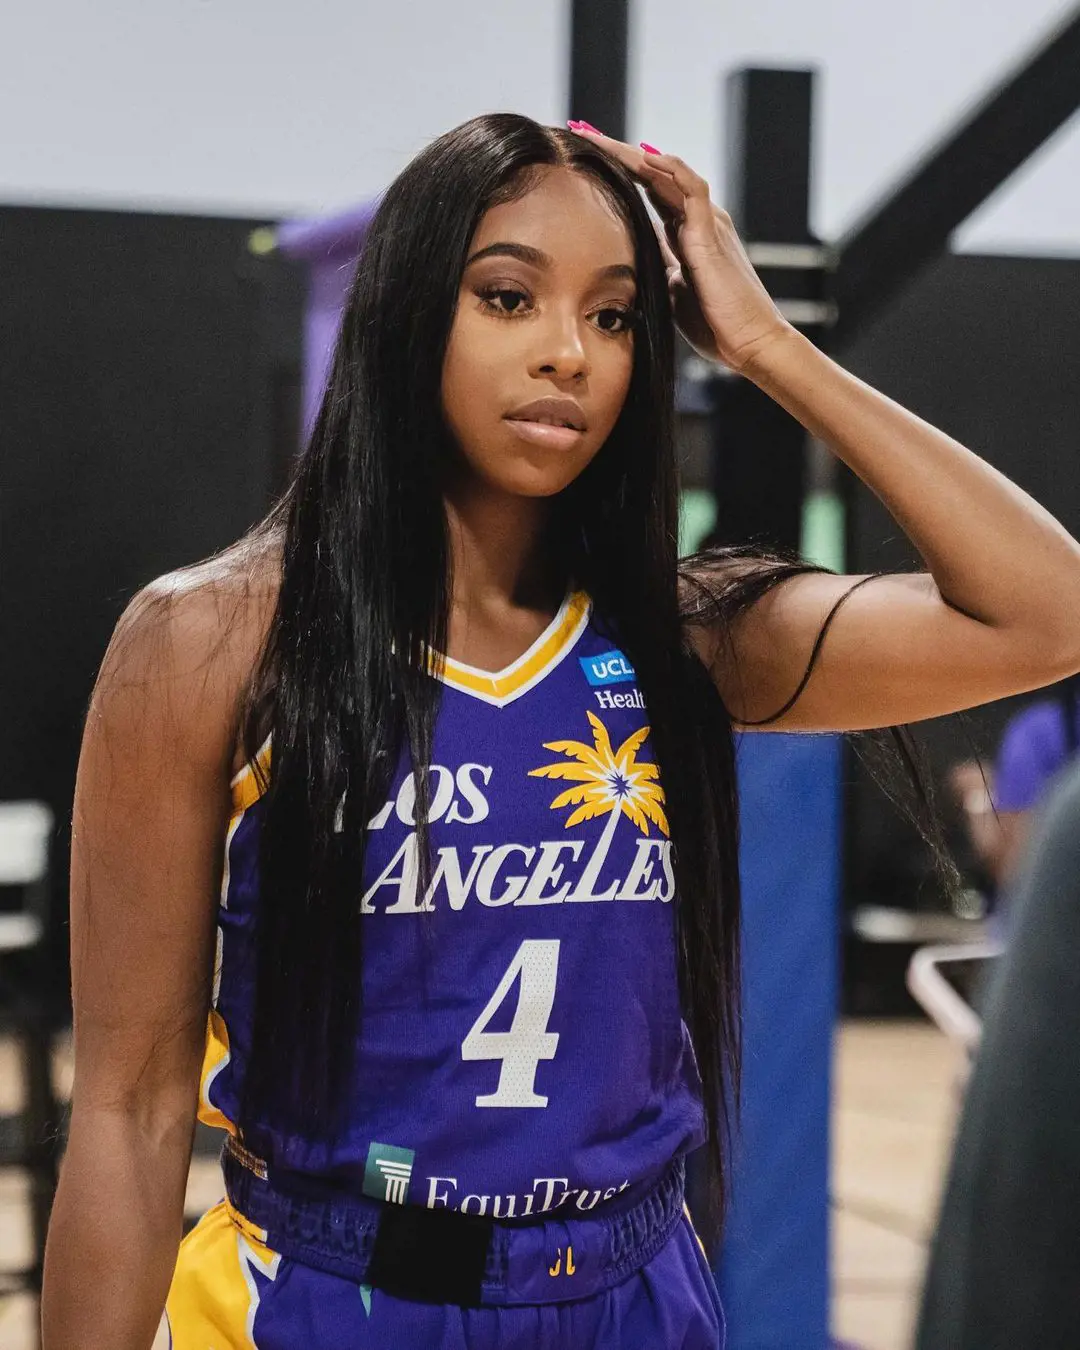 Lexie In The Sparks Uniform On 2 February 2023 At Los Angeles, California